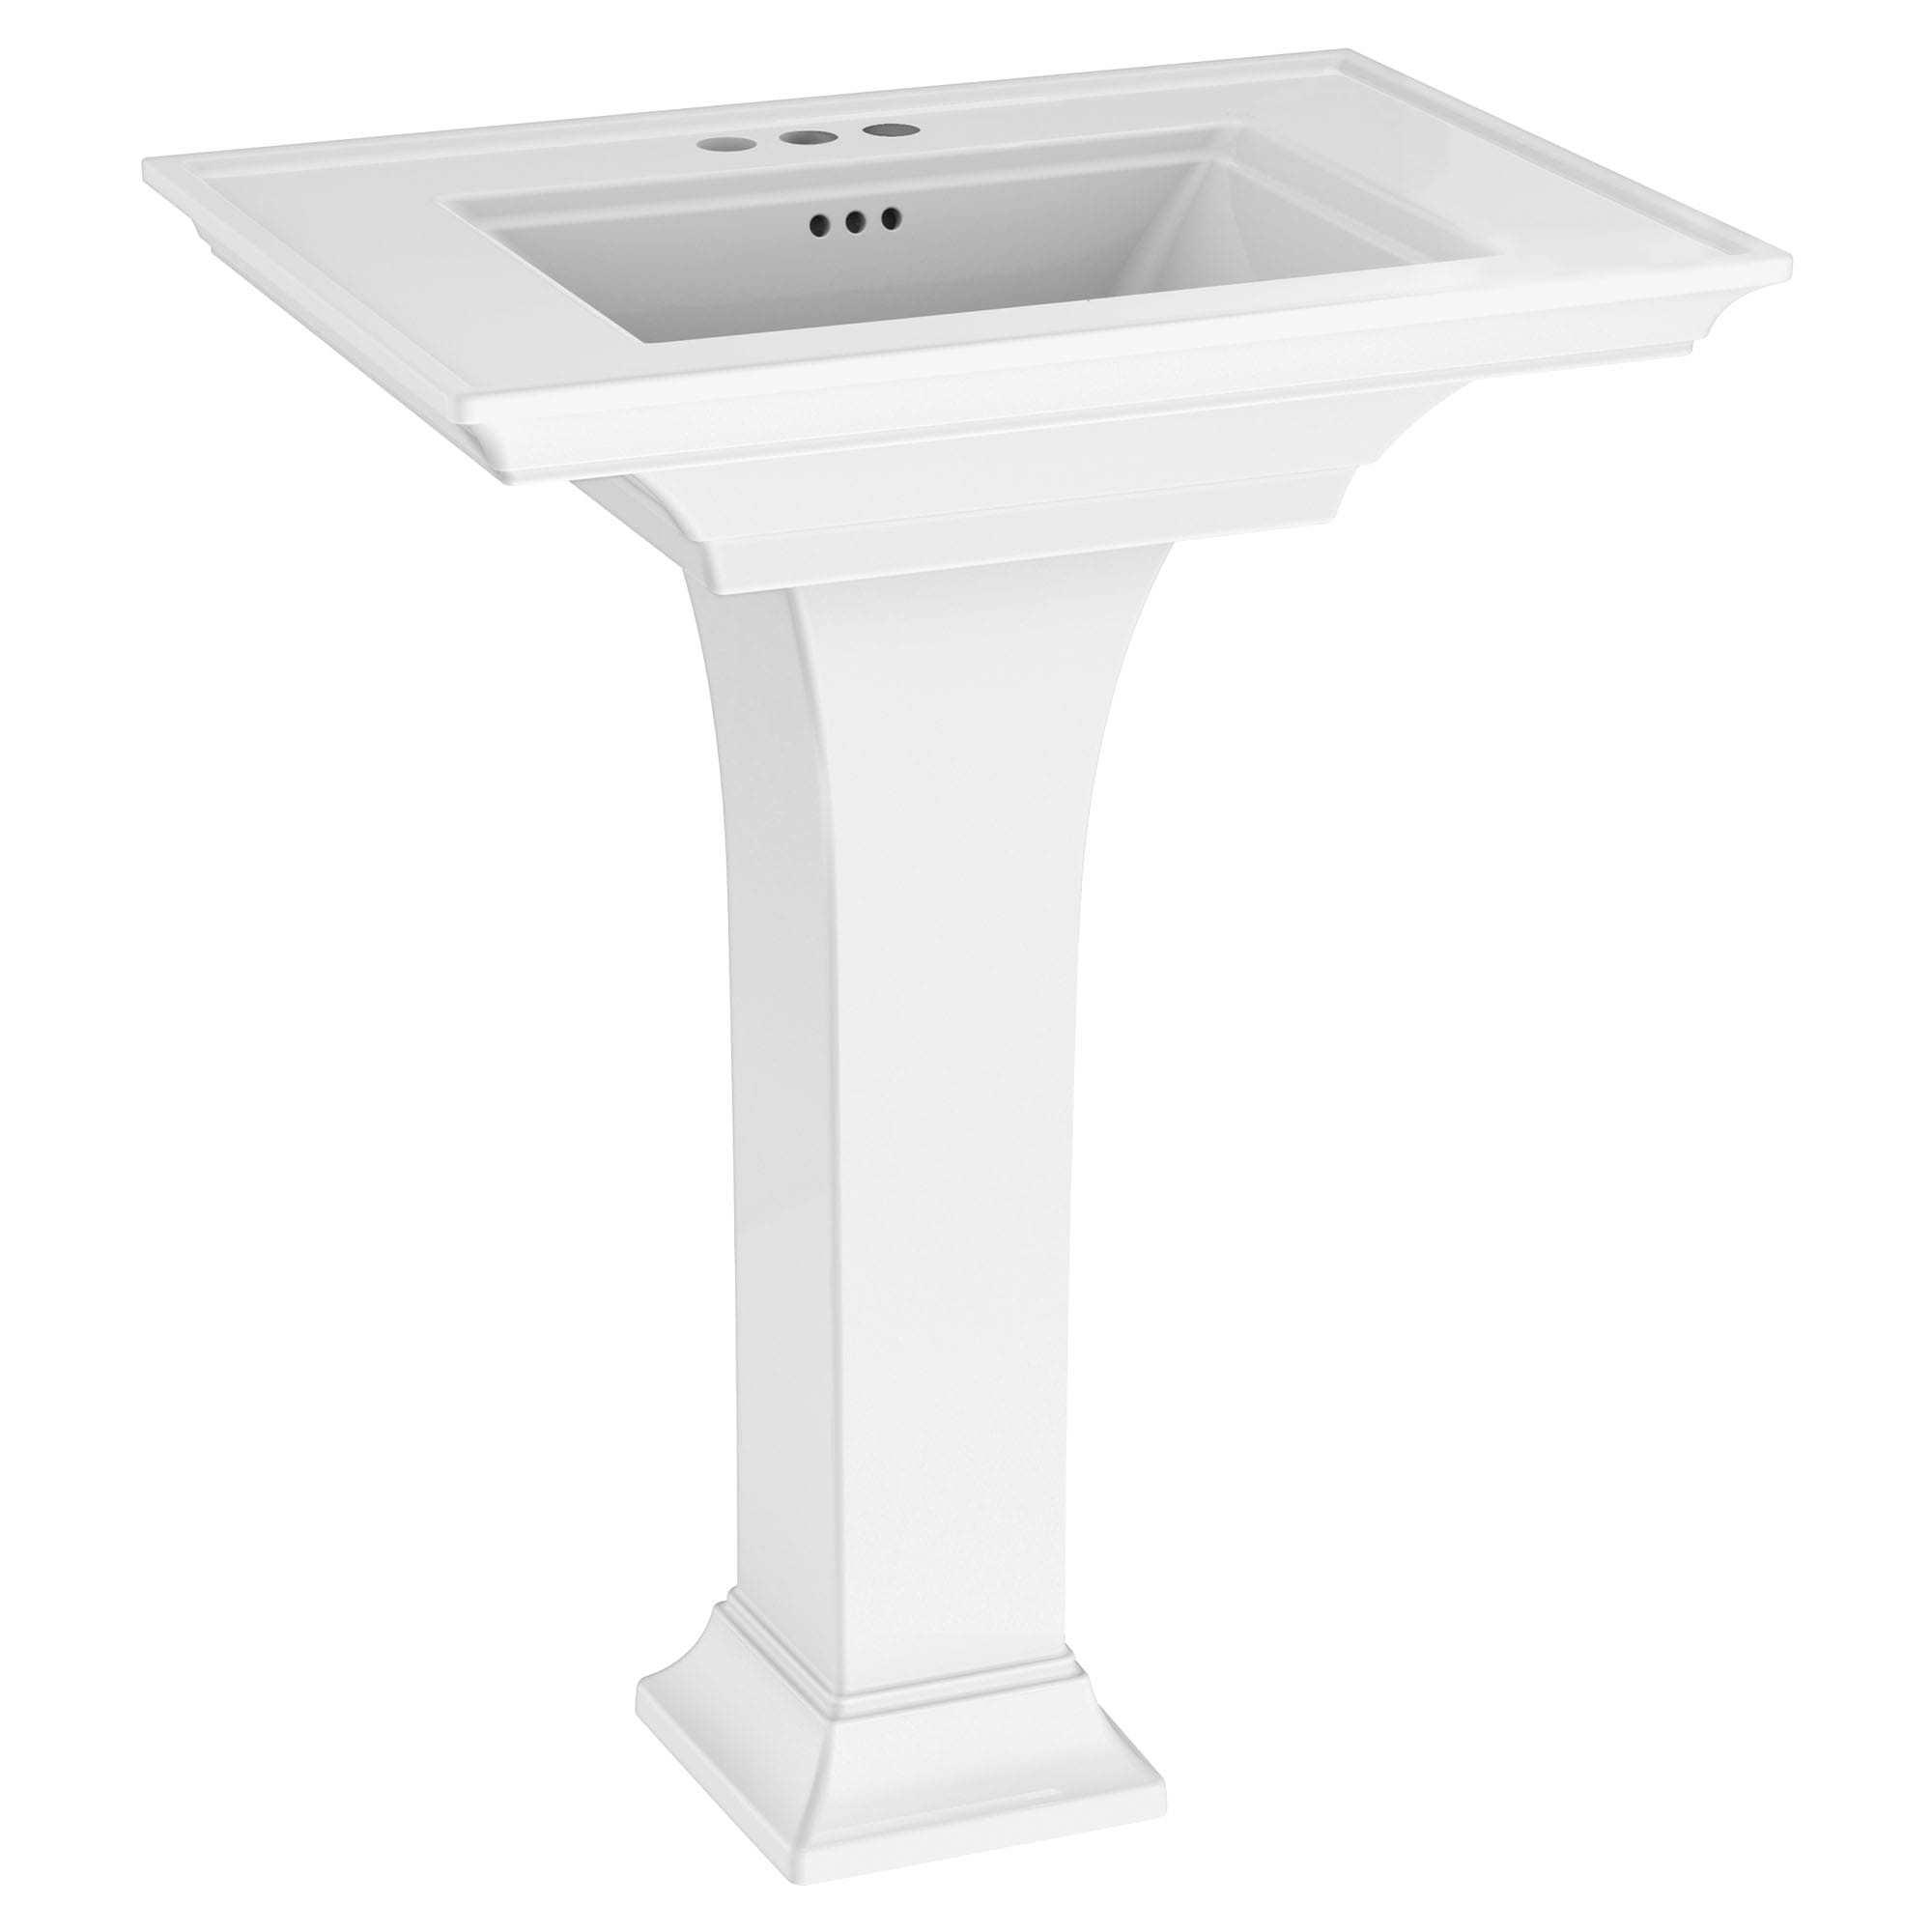 Town Square® S 4-Inch Centerset Pedestal Sink Top and Leg Combination